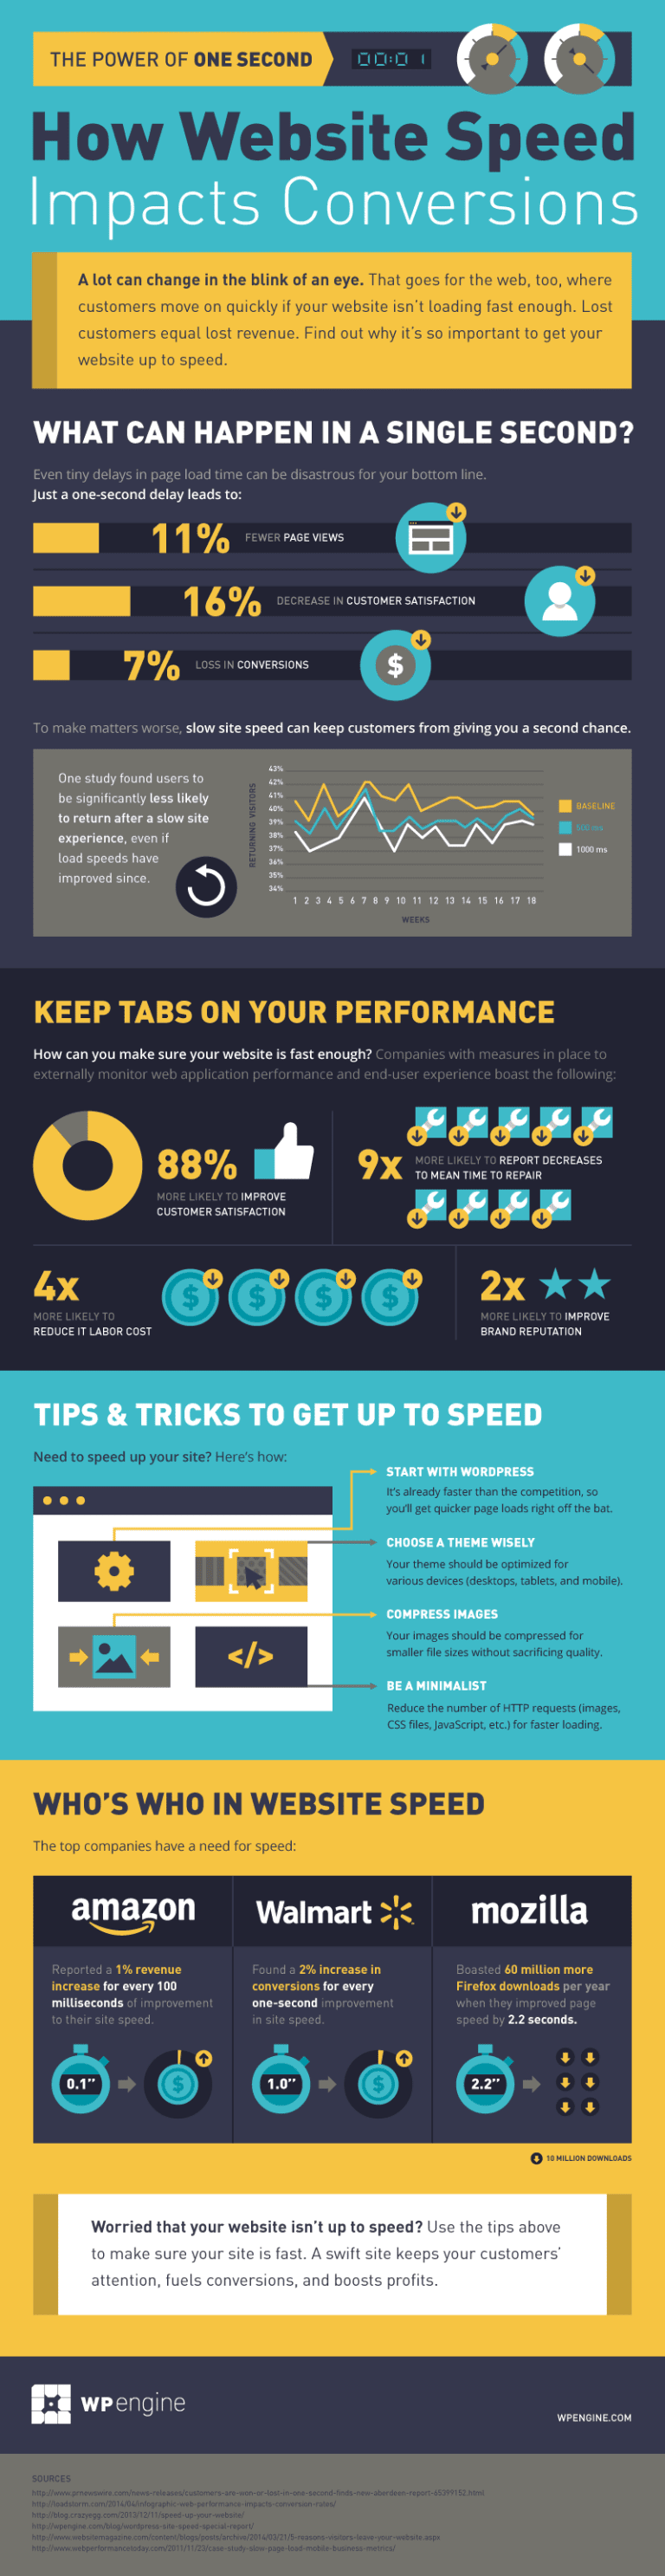 How Website Speed Impacts Conversions